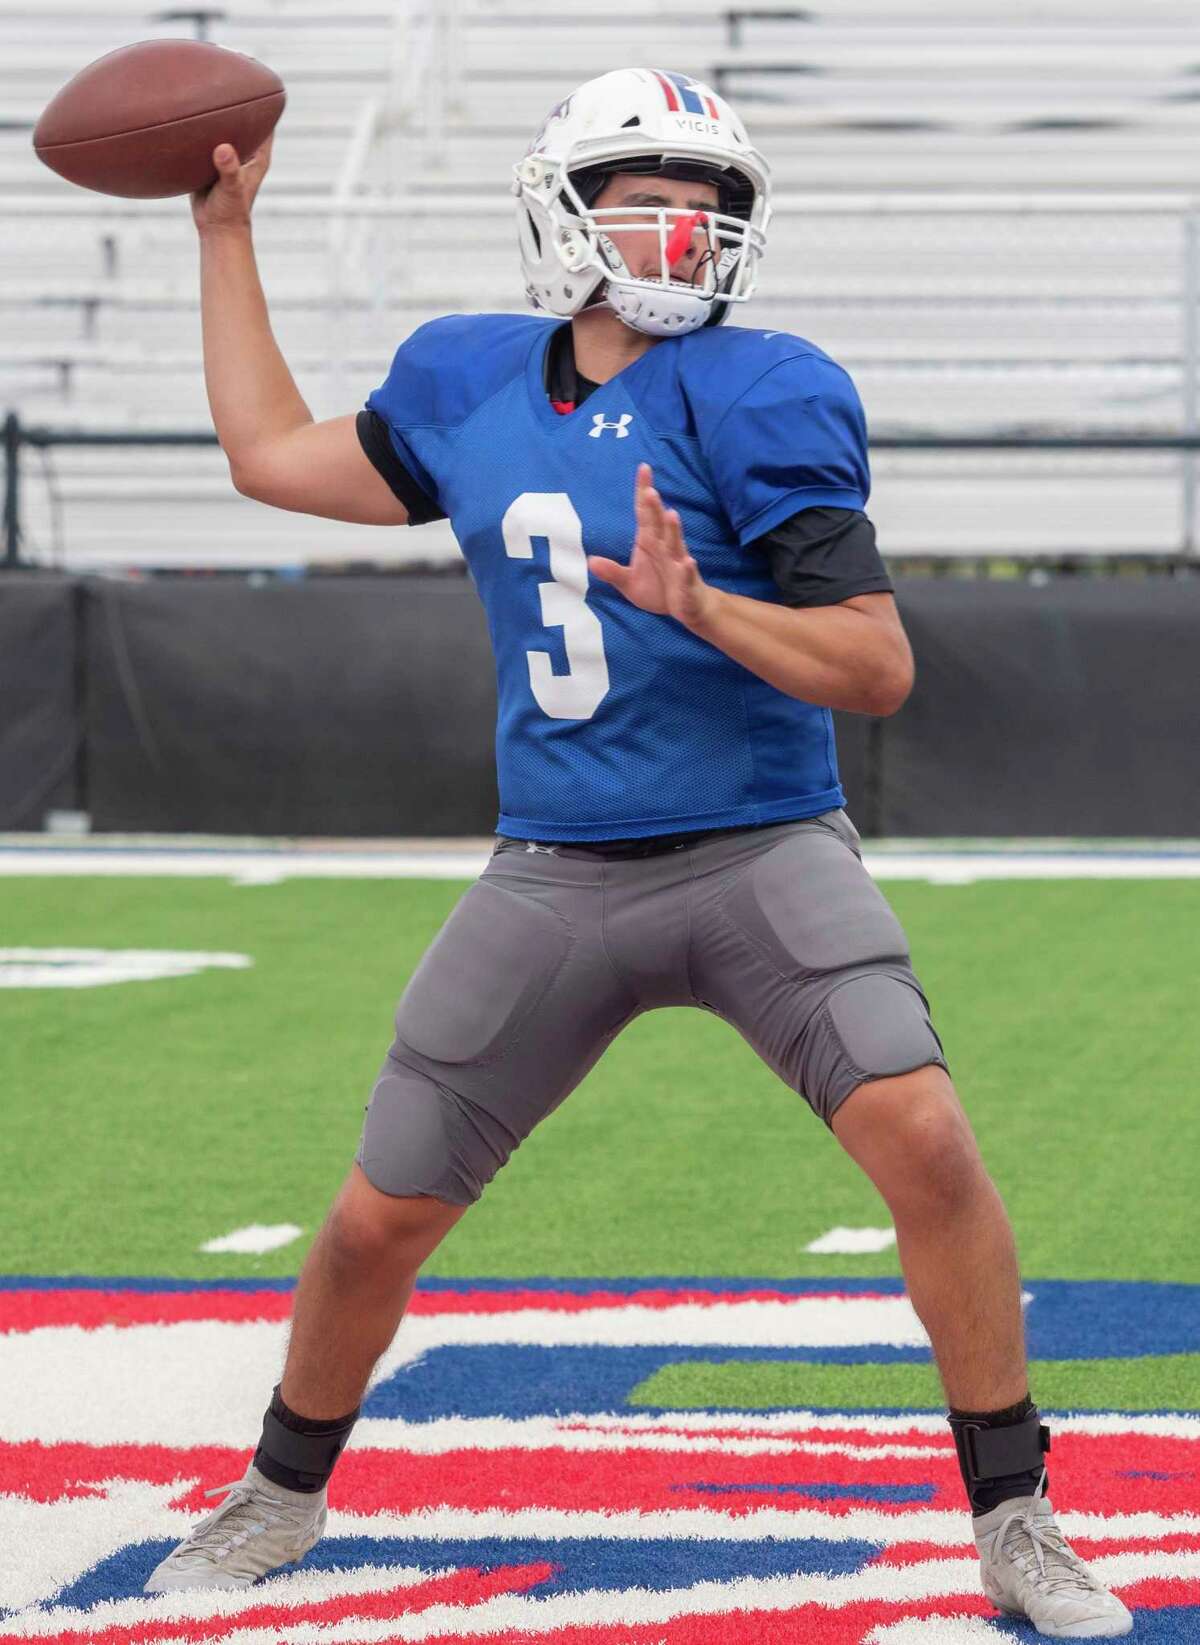 Midland Christian's Ryver Rodriguez looks to pass as he and other players run drills 08/11/2021at Gordon Awtry Field. Tim Fischer/Reporter-Telegram